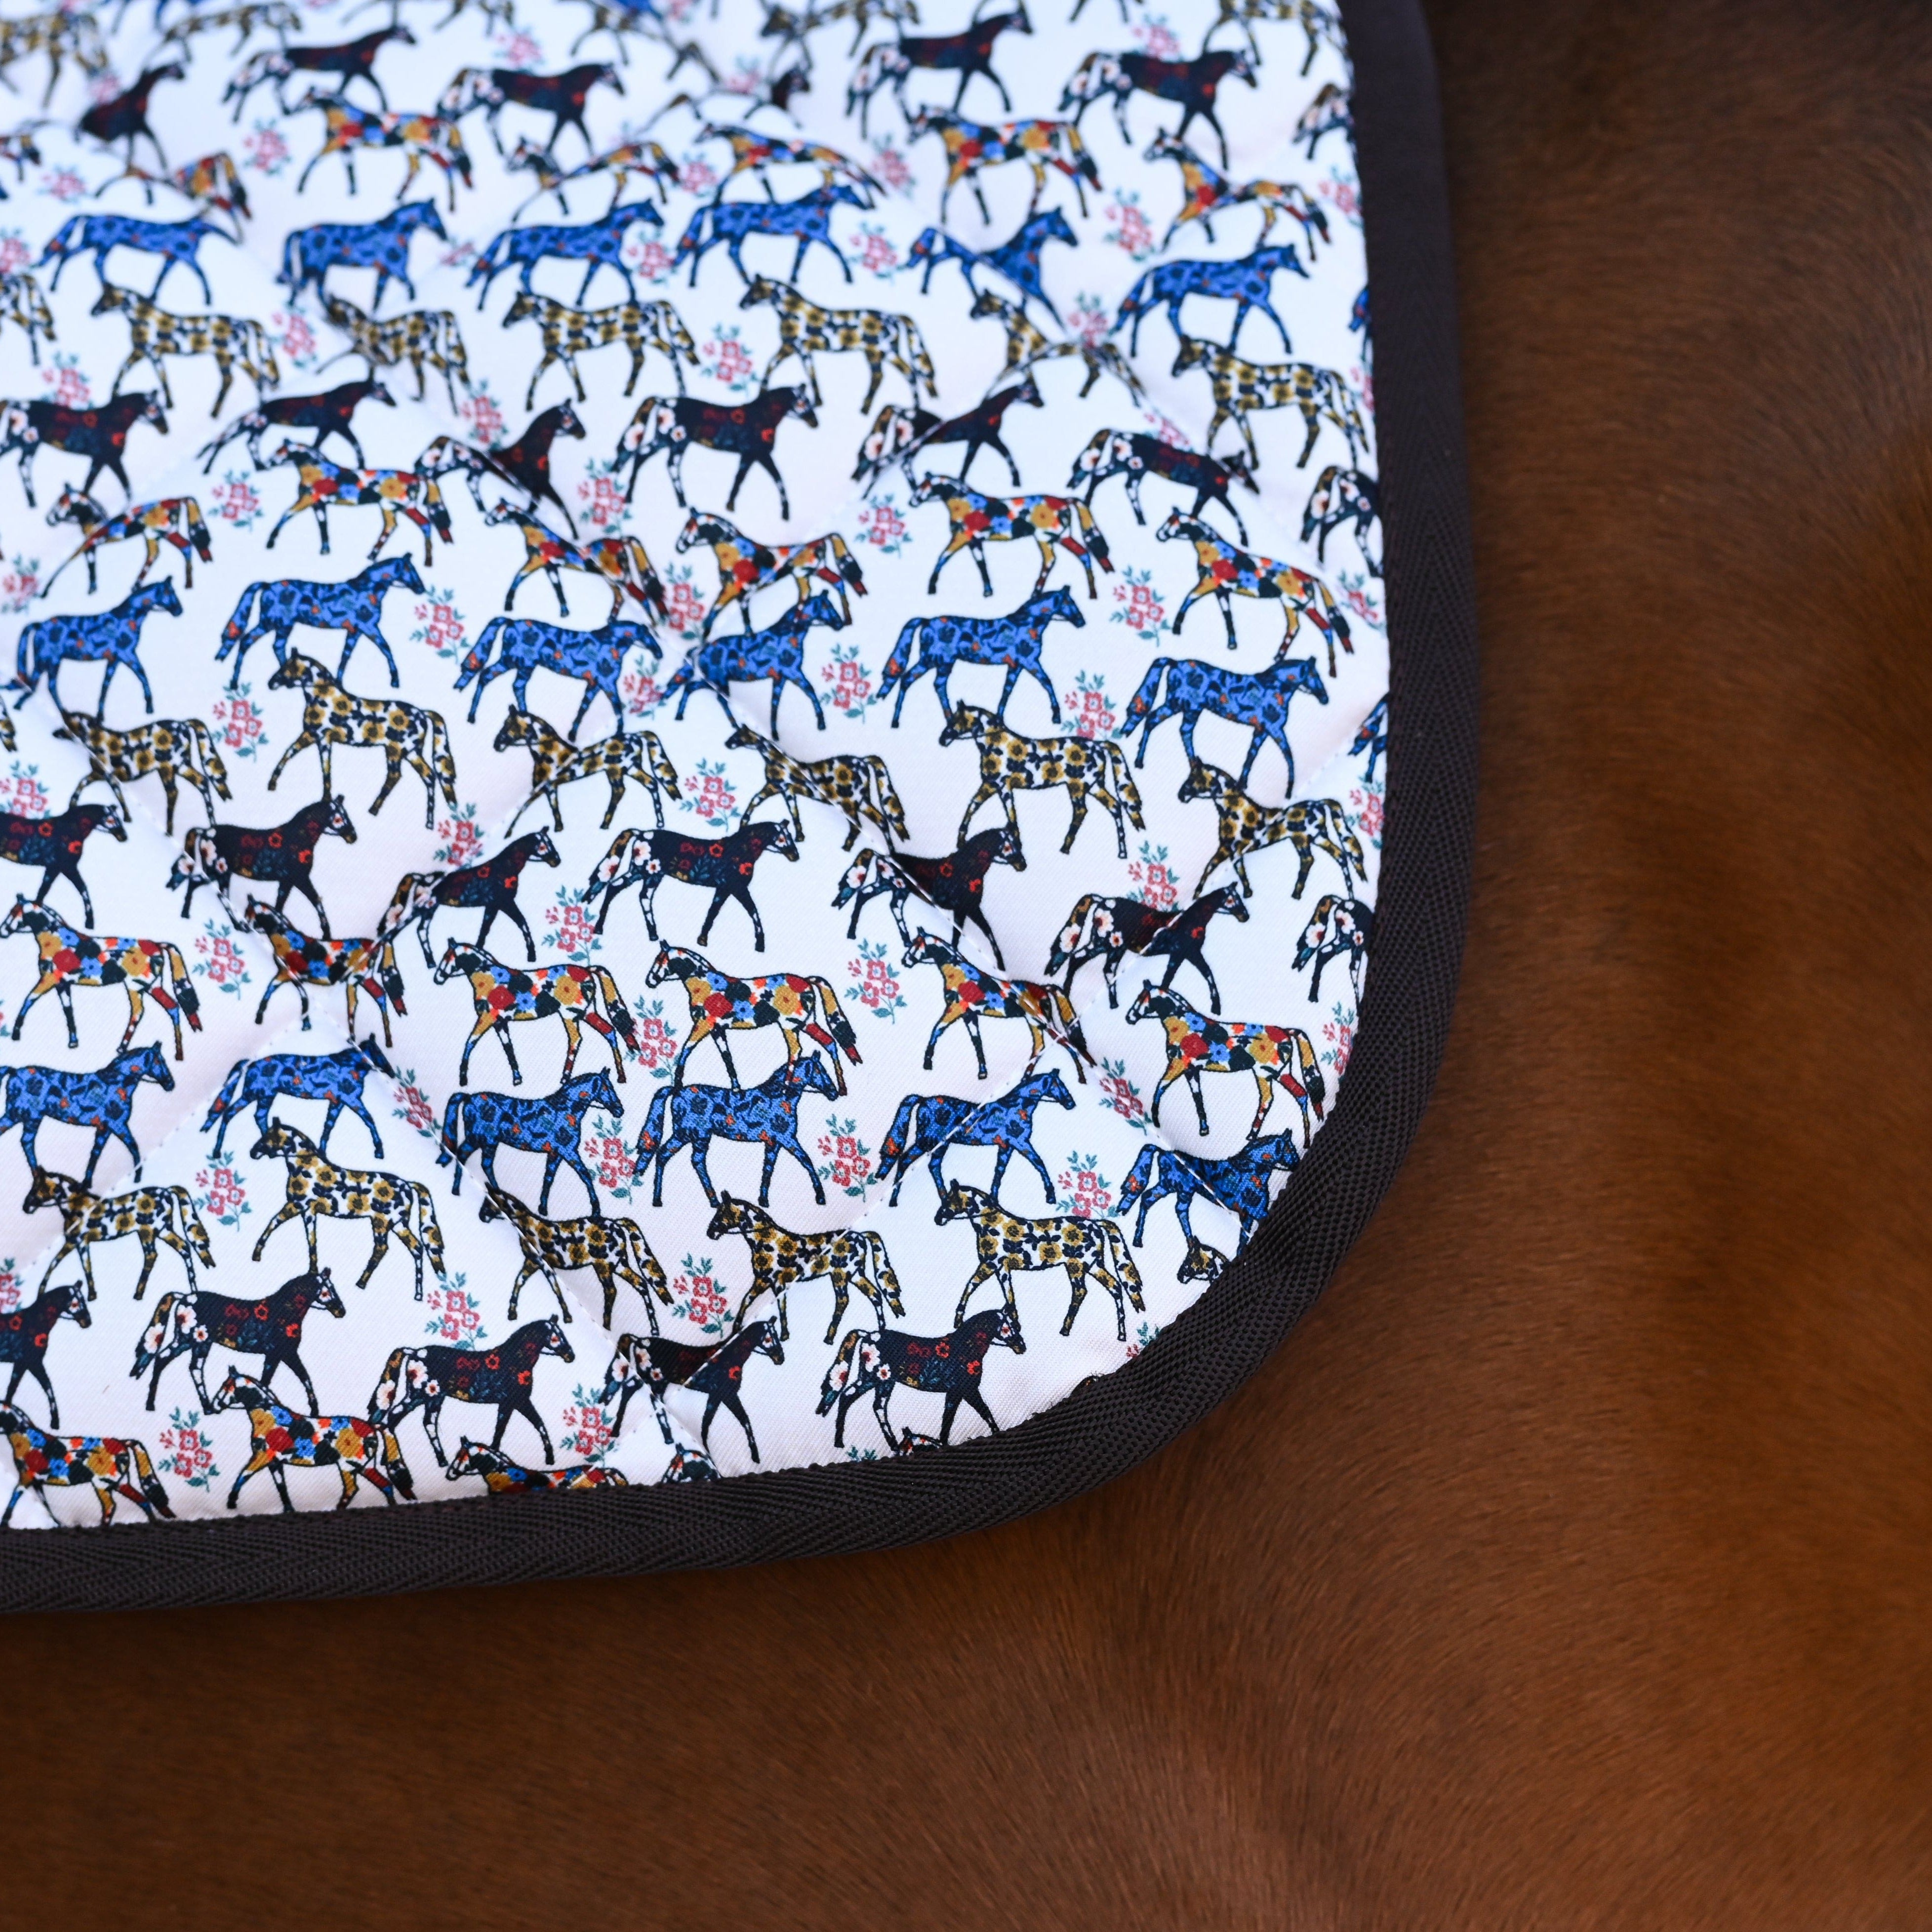 dreamers & schemers Saddle Pad Pony Mac Walking Horses Pair & a Spare equestrian boot socks boot socks thin socks riding socks pattern socks tall socks funny socks knee high socks horse socks horse show socks